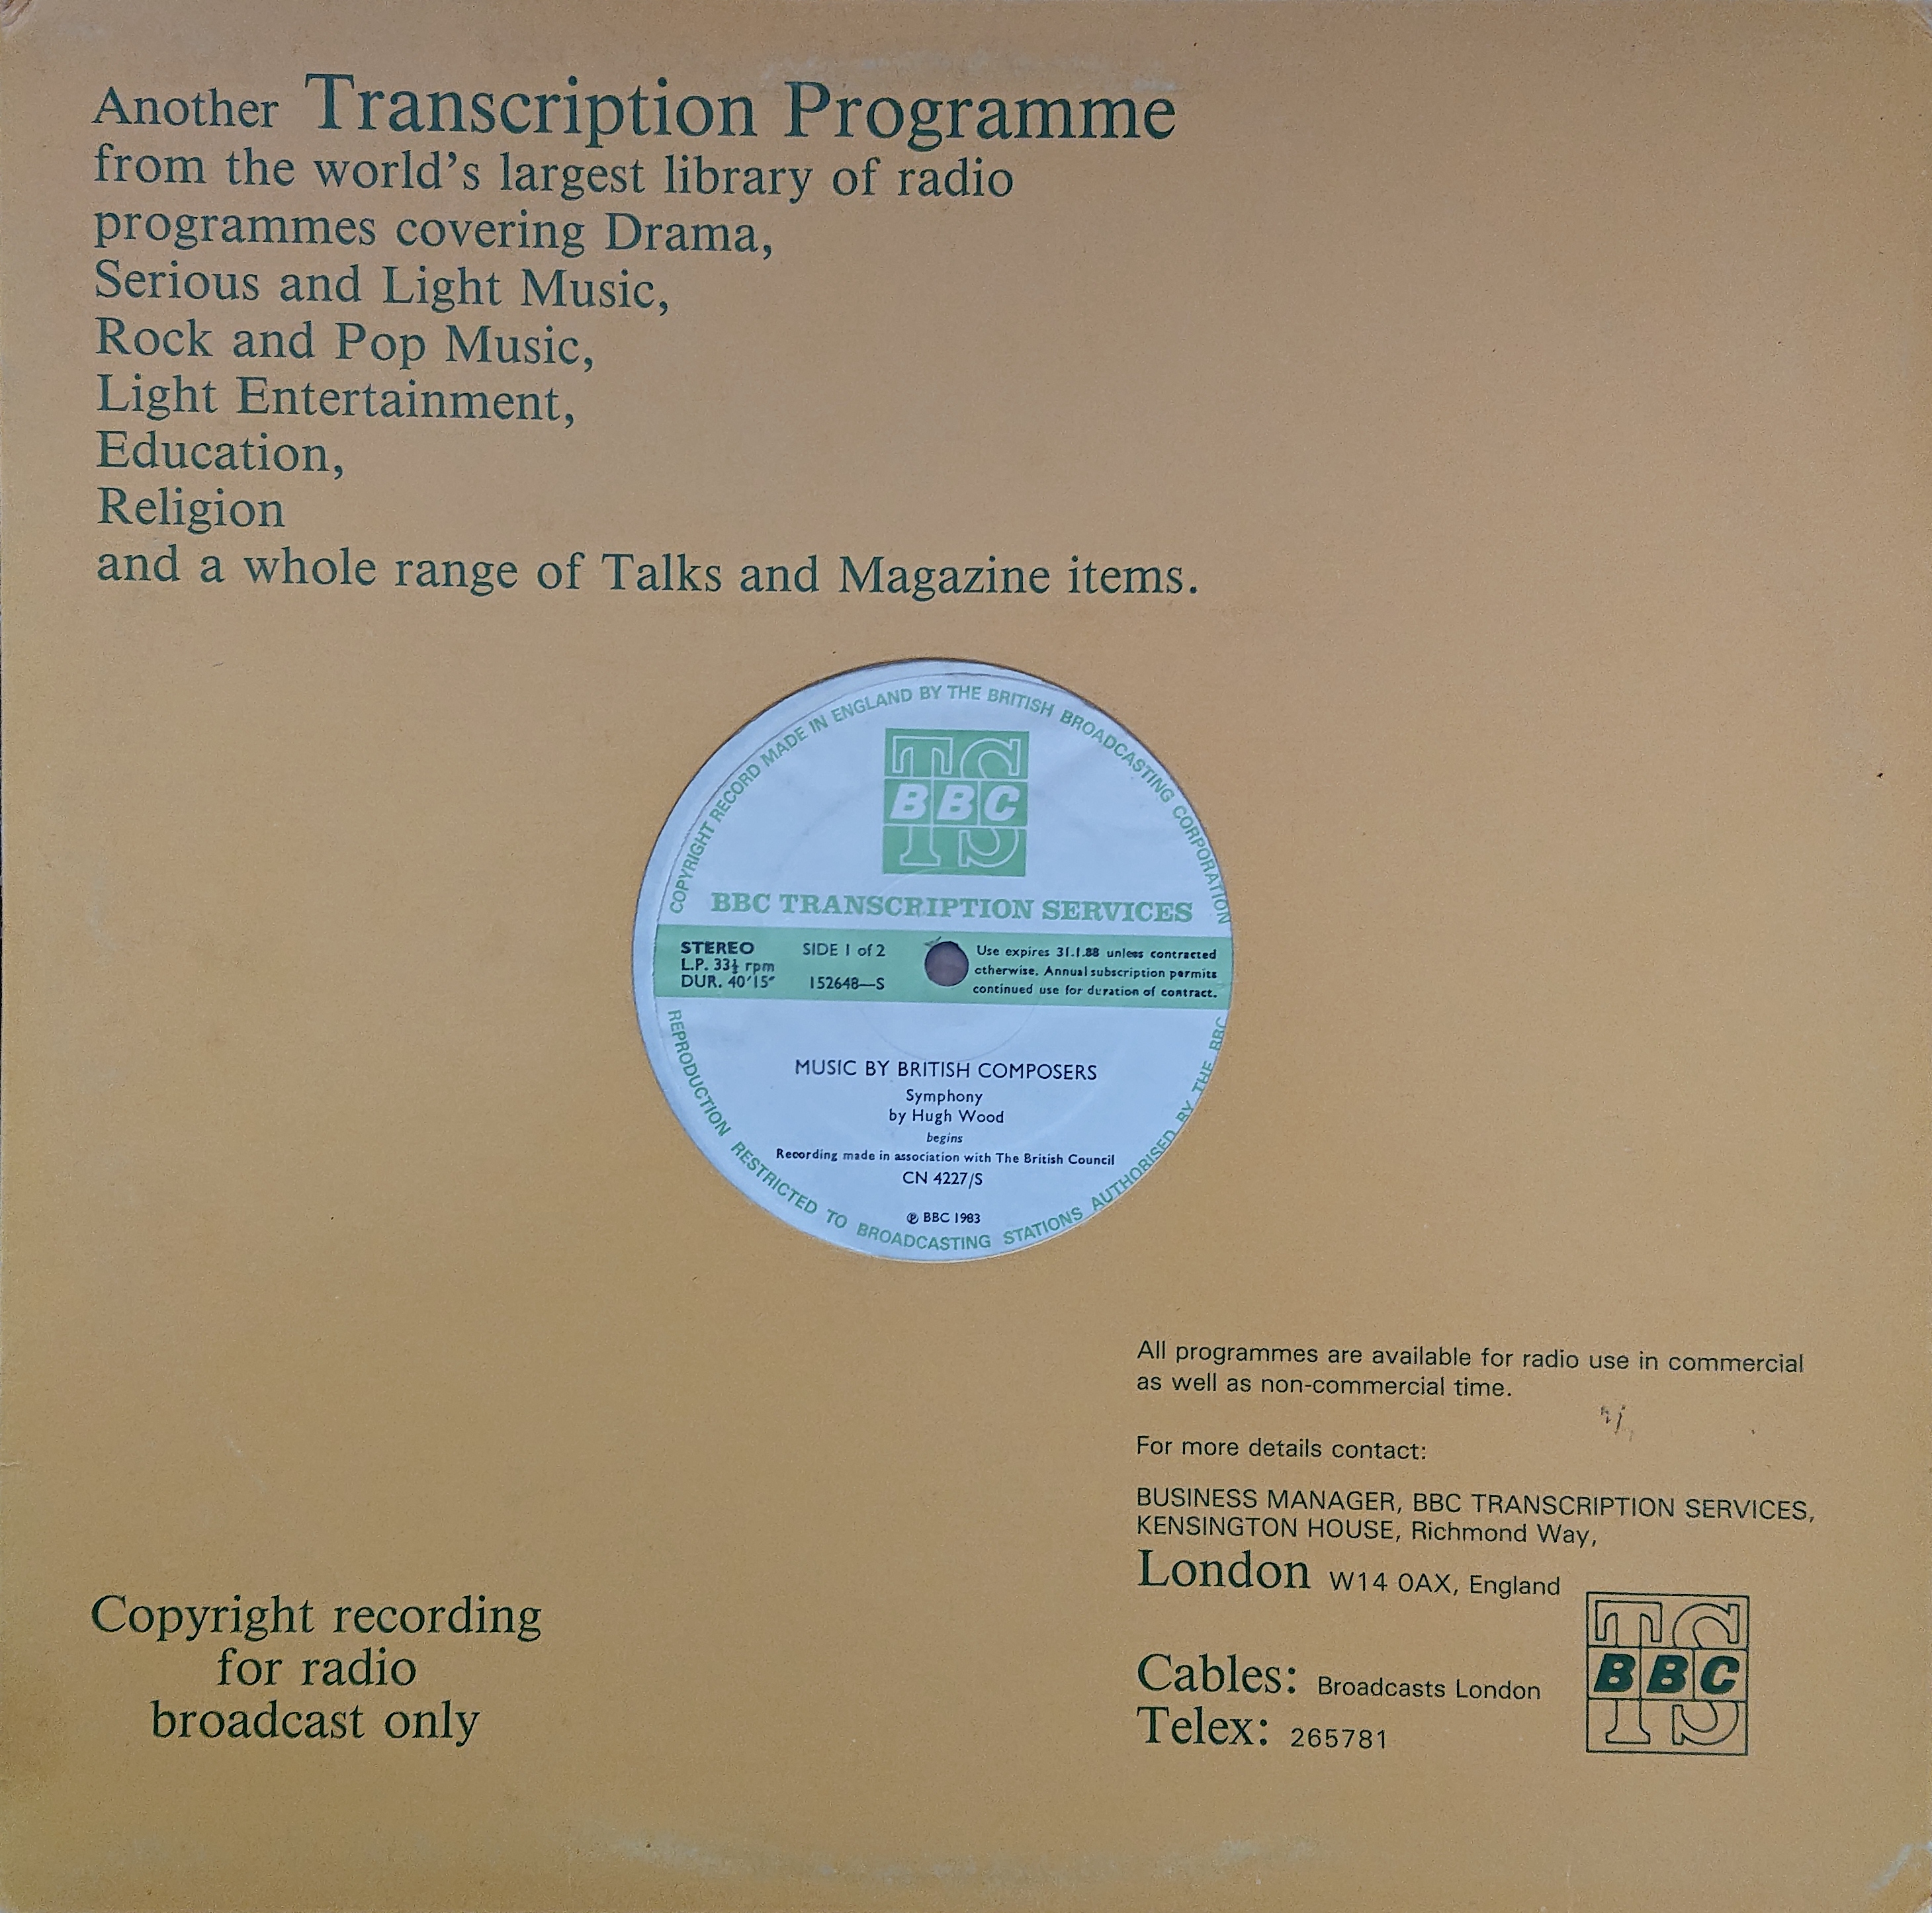 Picture of CN 4227 S 1 Music by British composers (Sides 1 of 2) by artist Hugh Wood / Alender Goehr from the BBC records and Tapes library